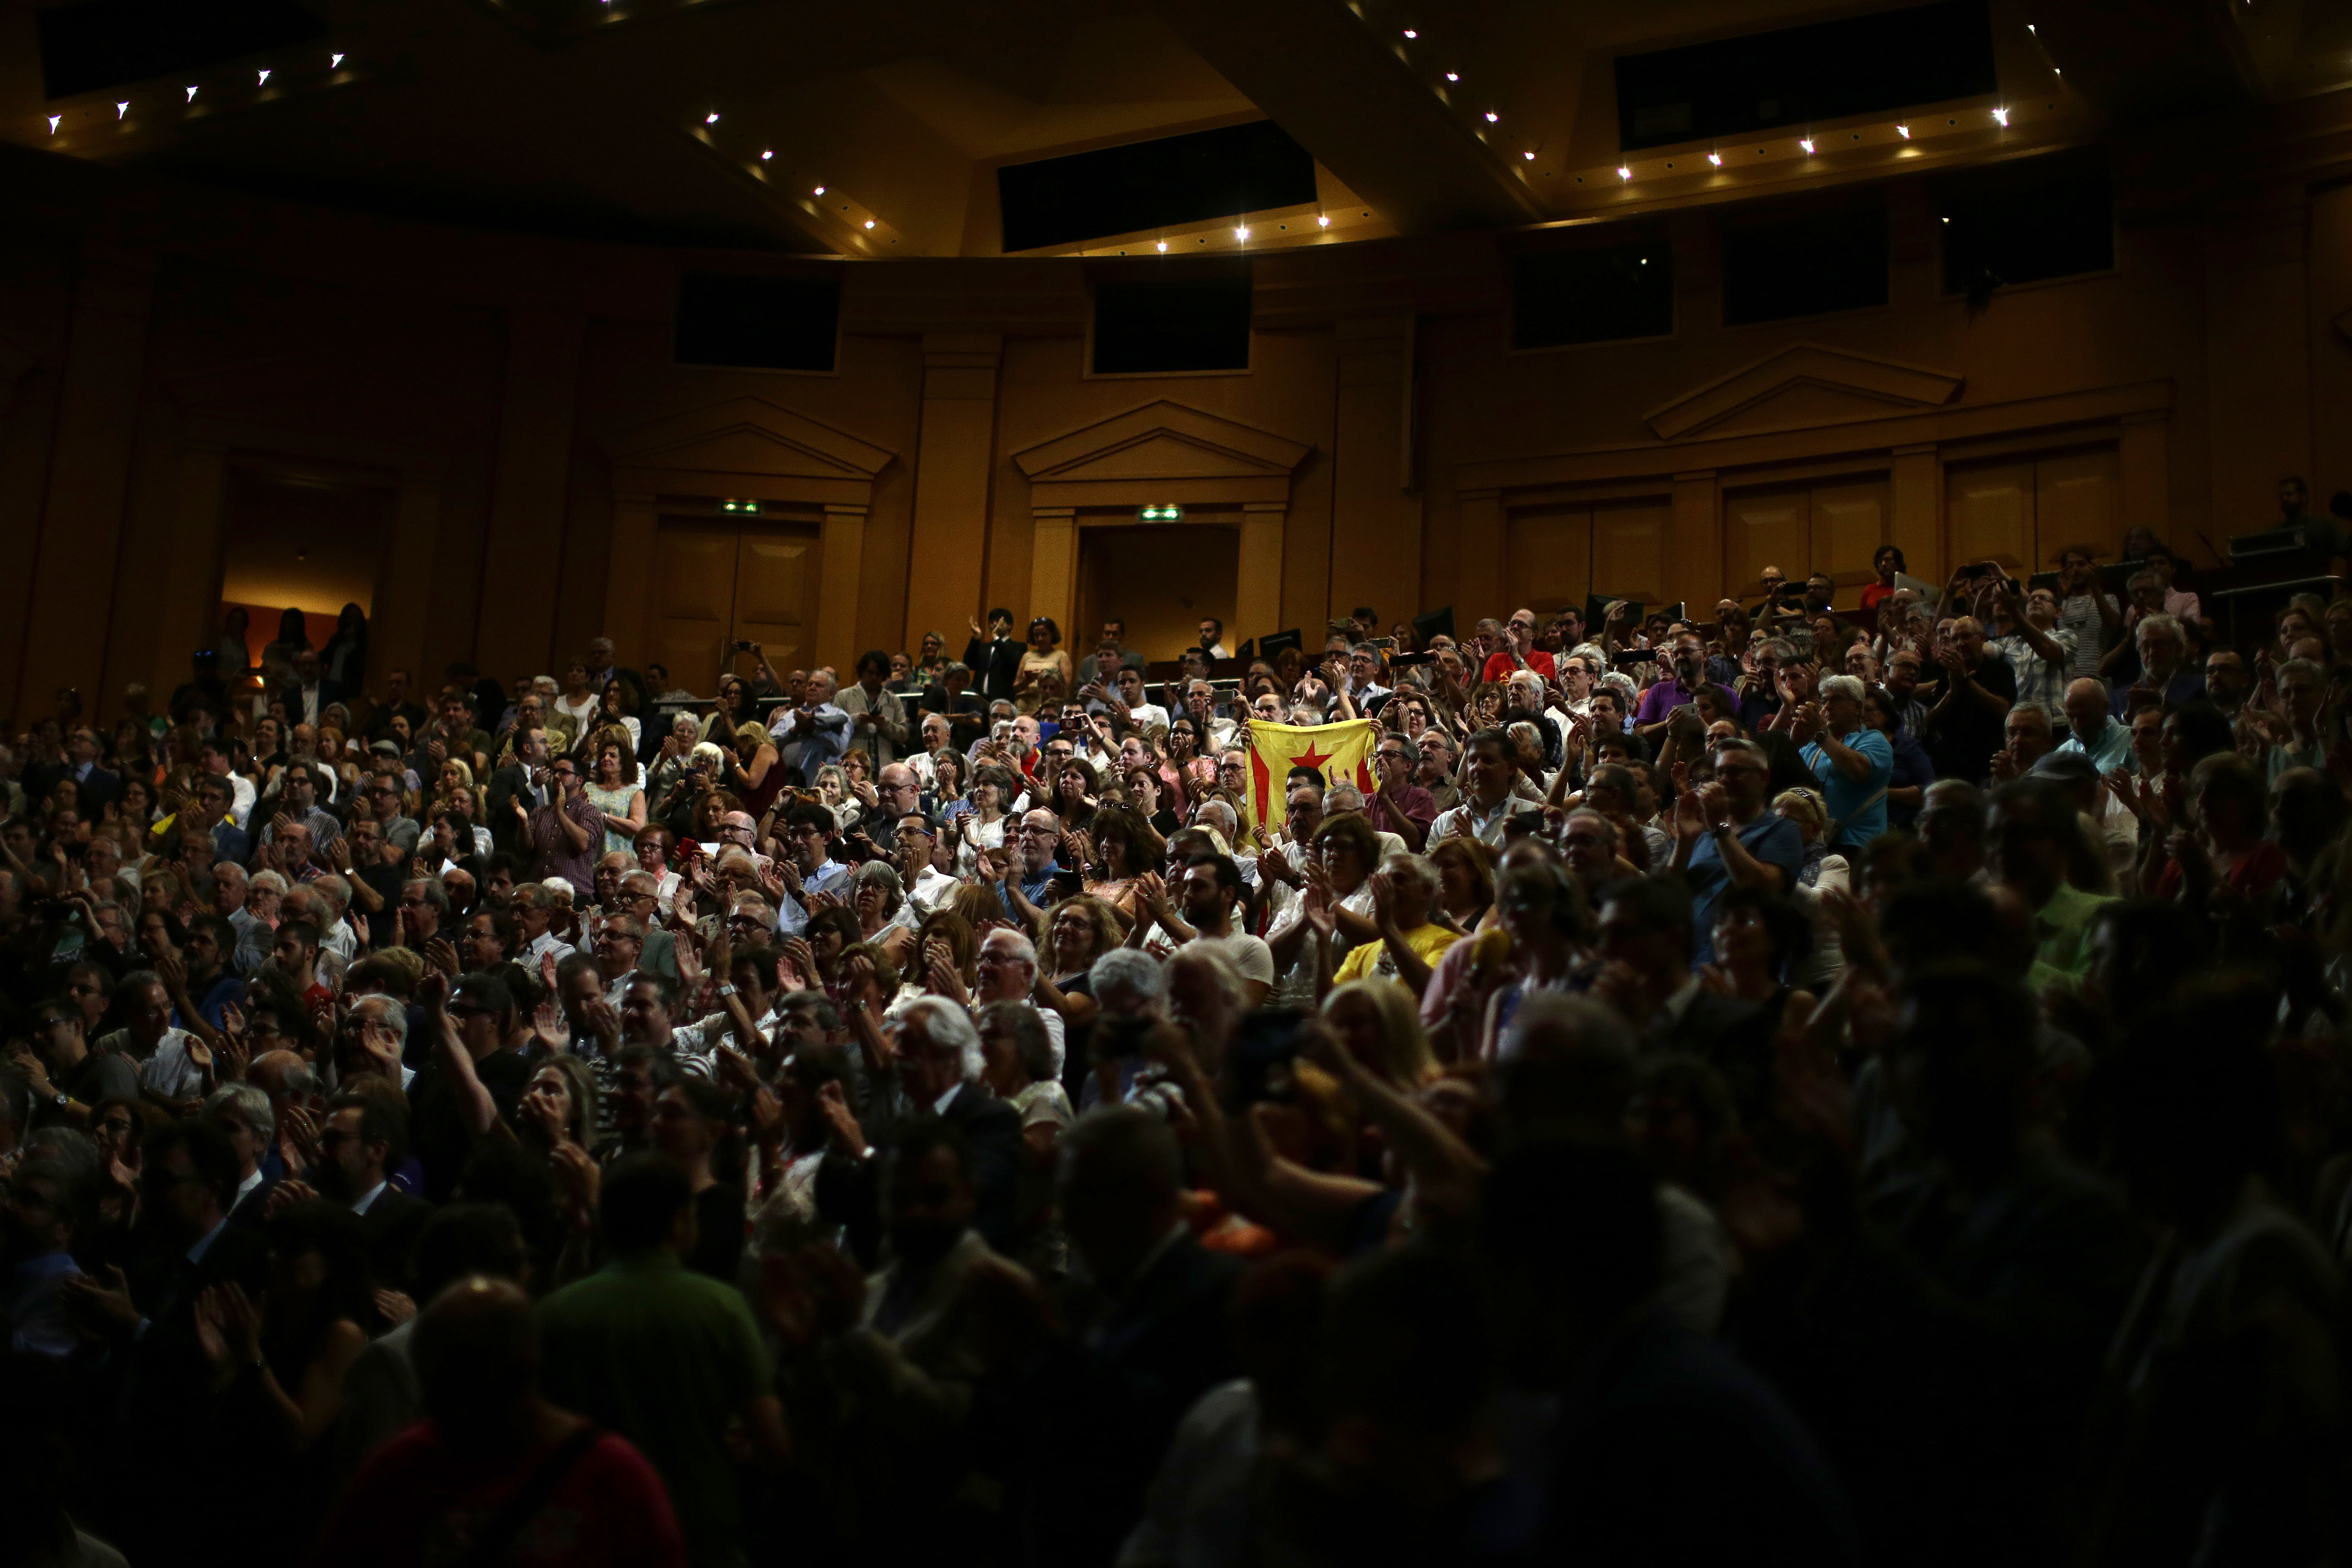 People applaud during a pro-independence meeting in Barcelona, Spain, Tuesday, July, 4, 2017. Catalonia's regional government chose October 1st for a referendum on a split from Spain, stepping up the confrontation with central authorities who see the vote as illegal. (AP Photo/Manu Fernandez)